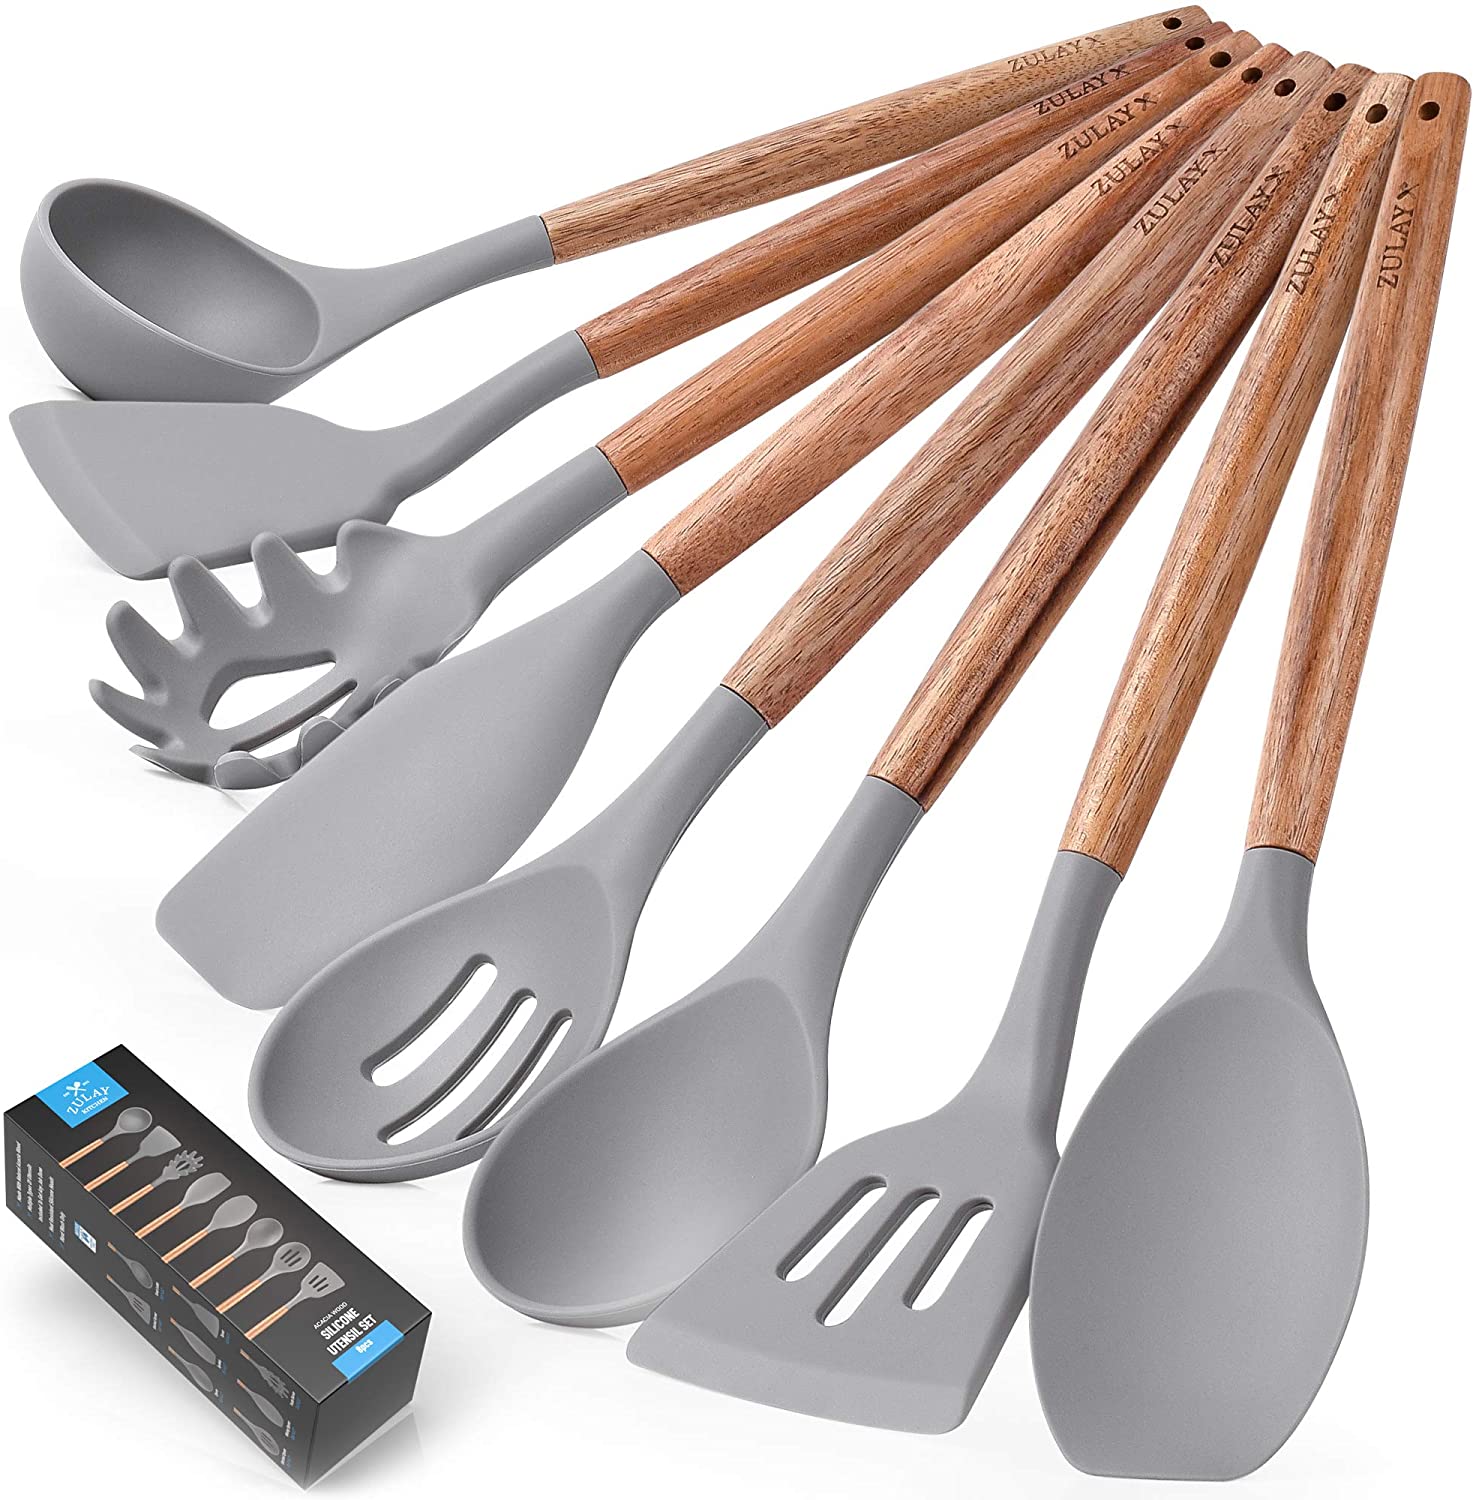 Zulay Silicone Kitchen Utensils For Cooking